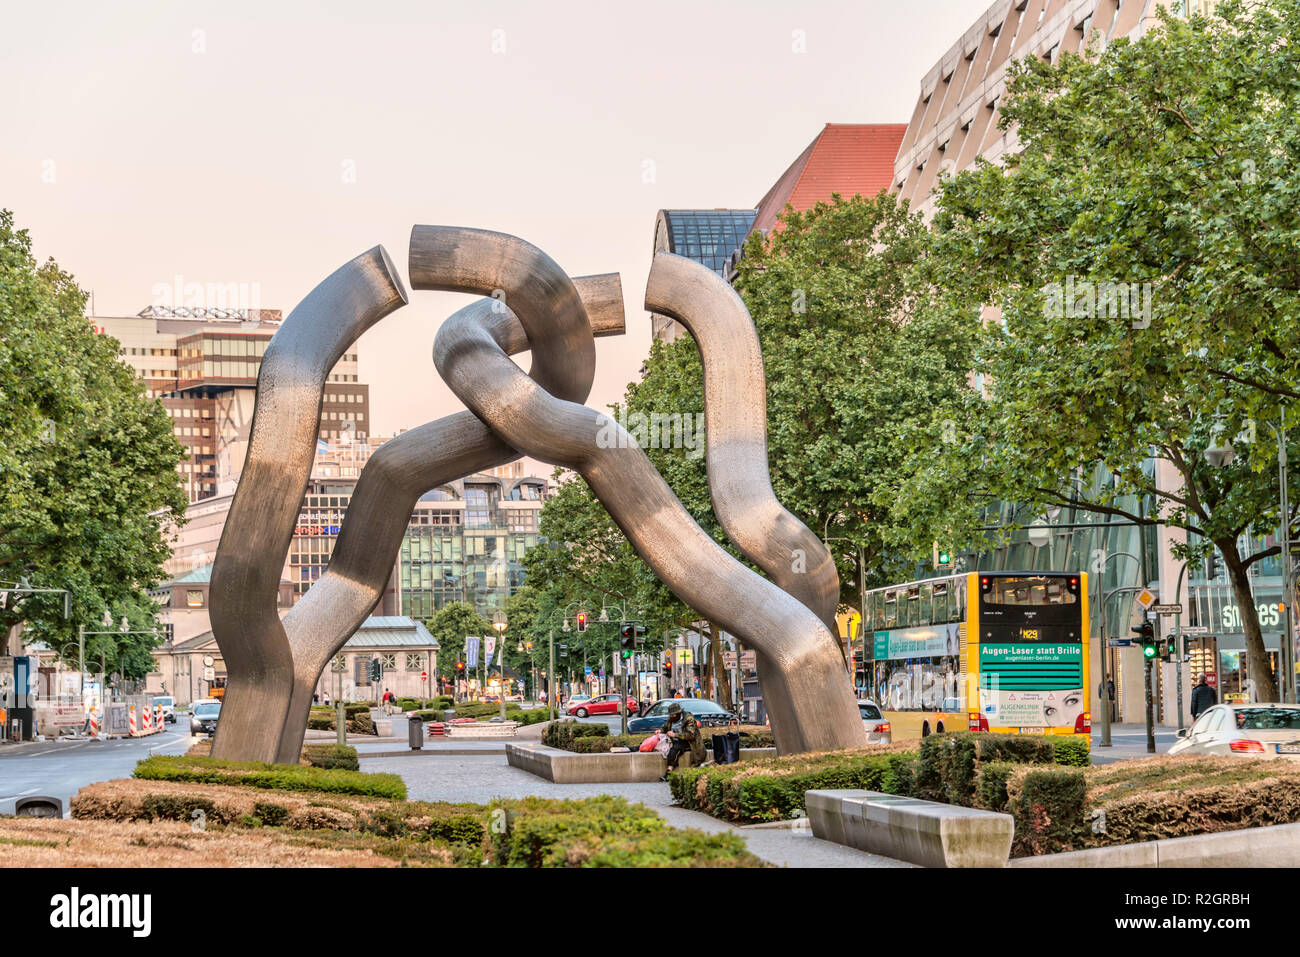 Artwork made of stainless steel for the 750 anniversary of Berlin, Germany Stock Photo